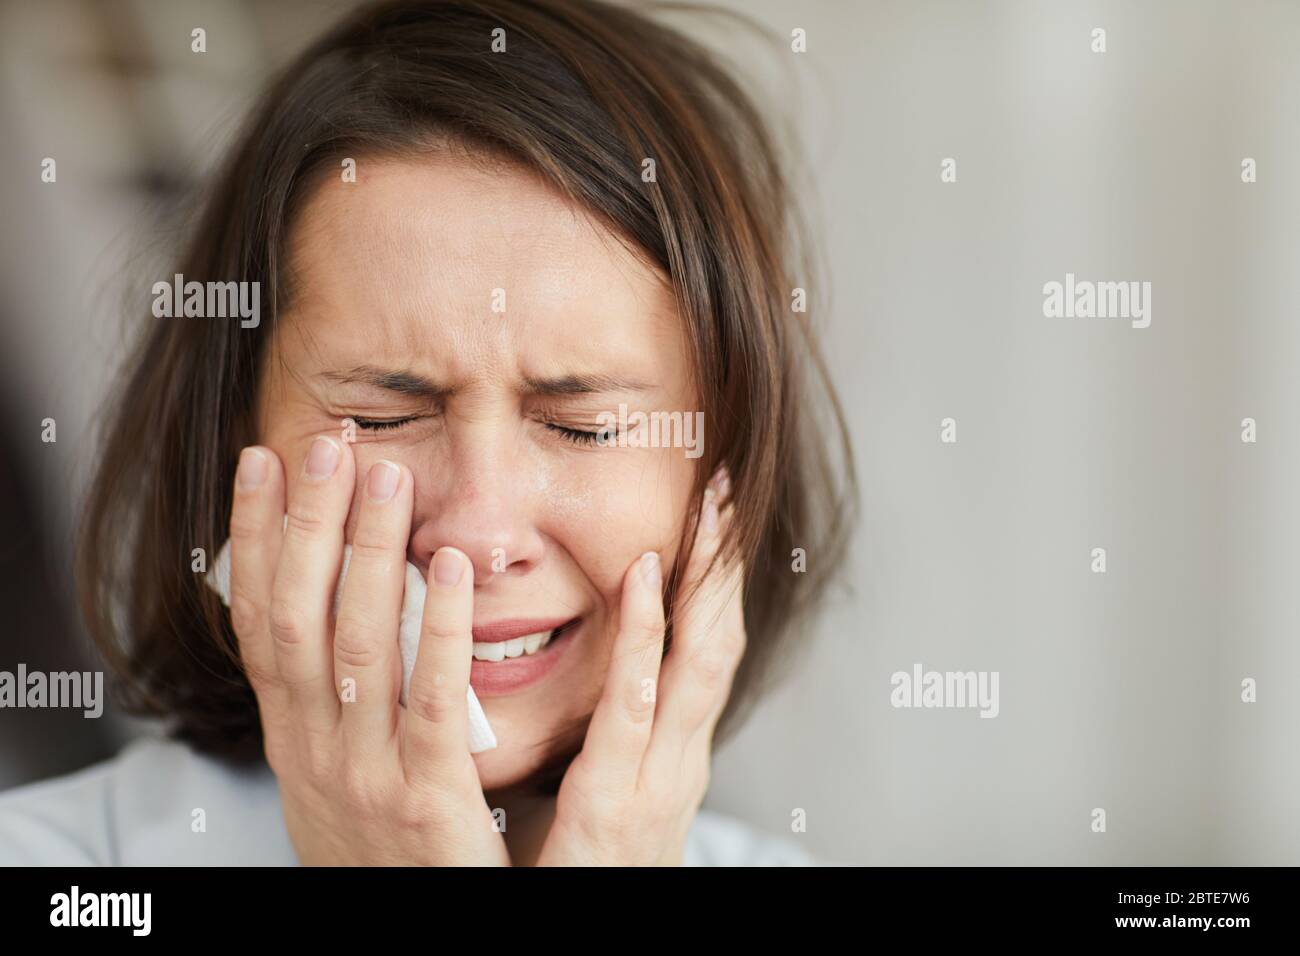 Close up portrait of disheveled adult woman crying hysterically with eyes closed and holding tissue, copy space Stock Photo